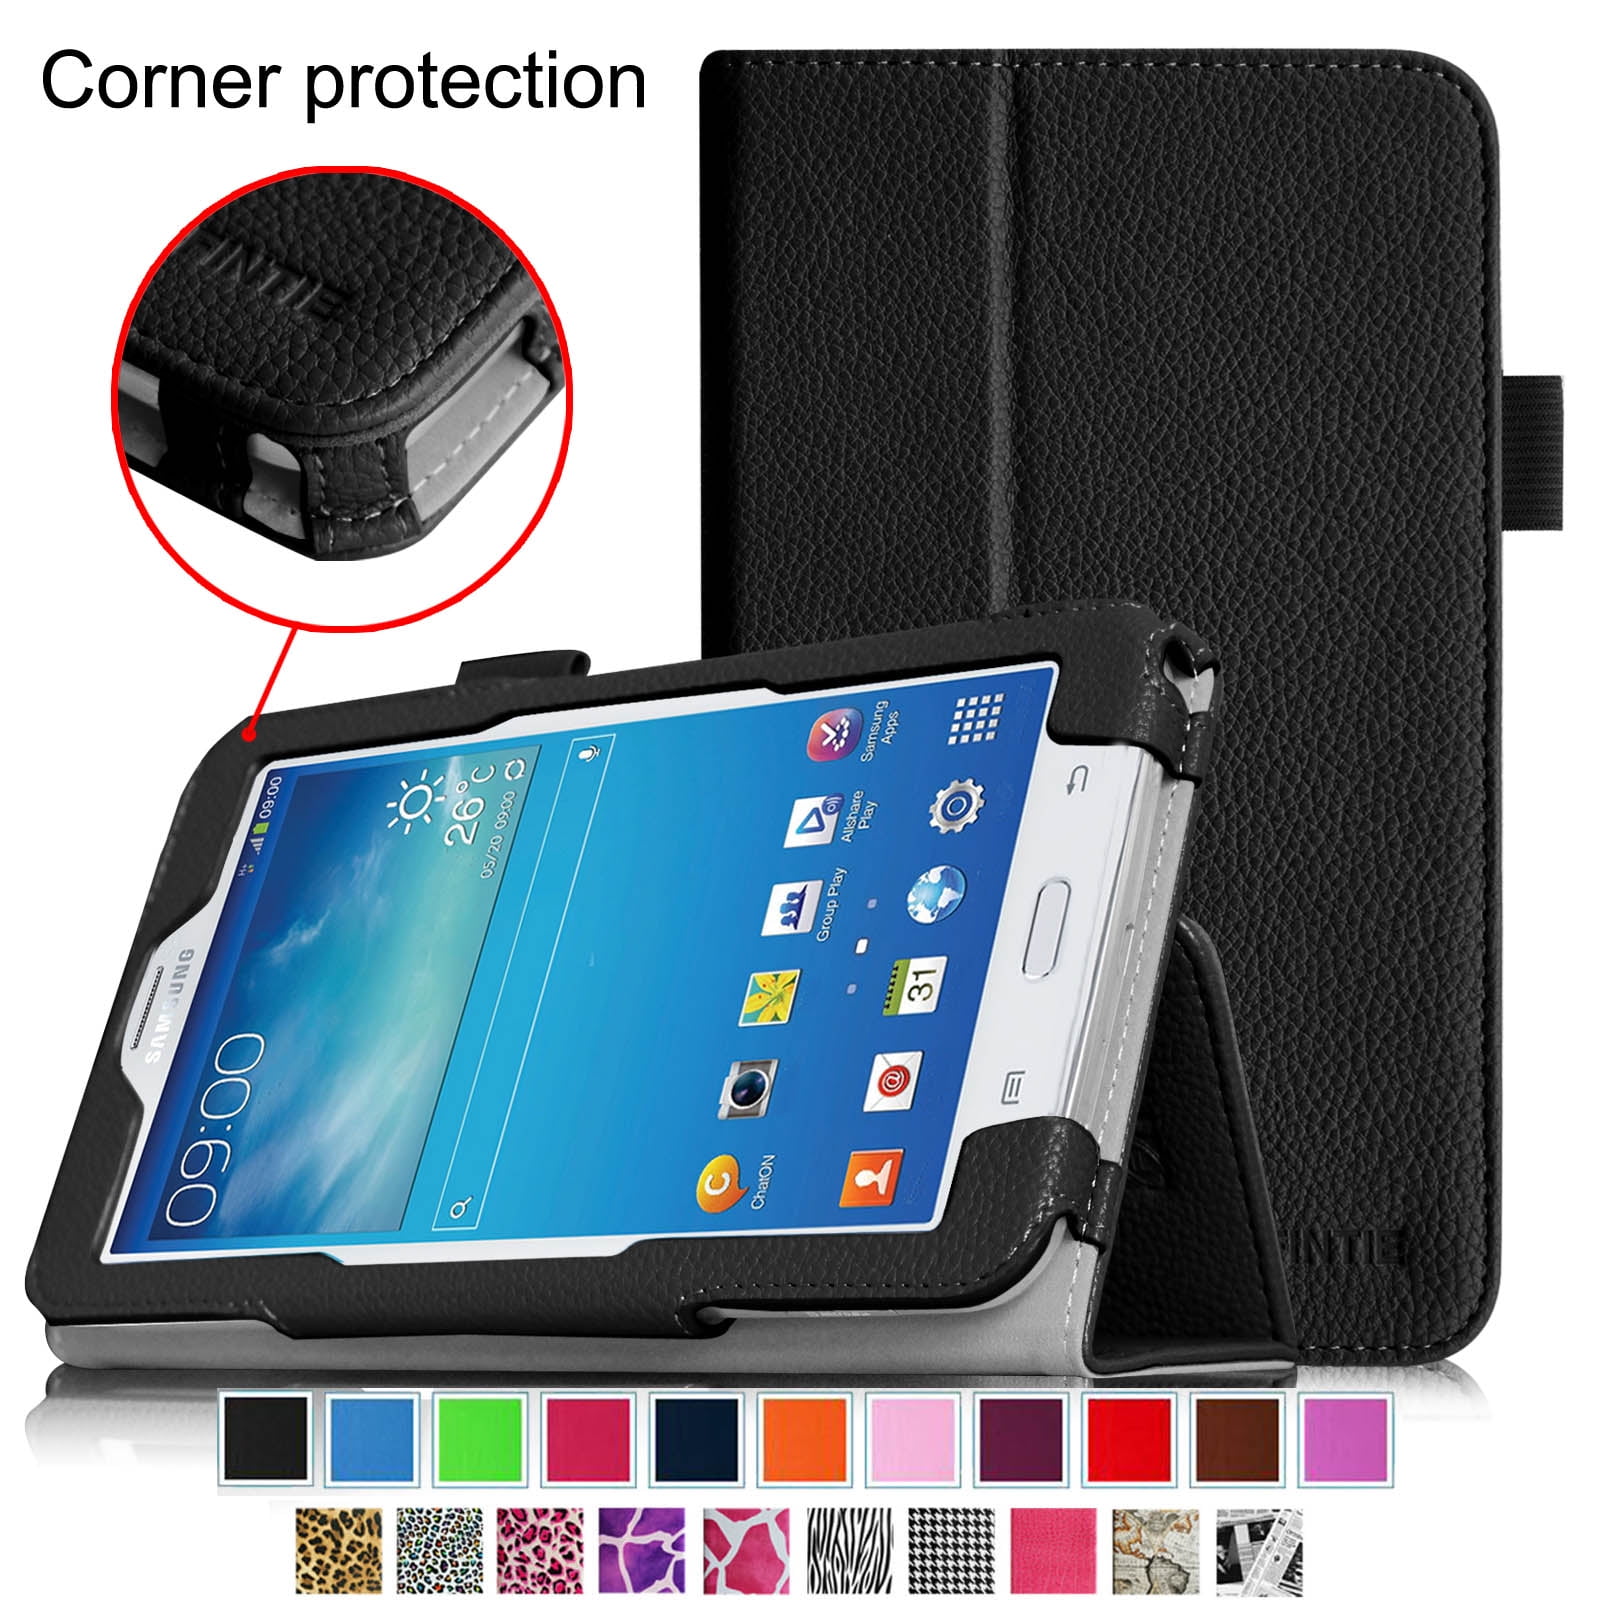 Full Coverage HD Screen Protector for Tablet Samsung Galaxy Tab E Lite 7.0" Kids 